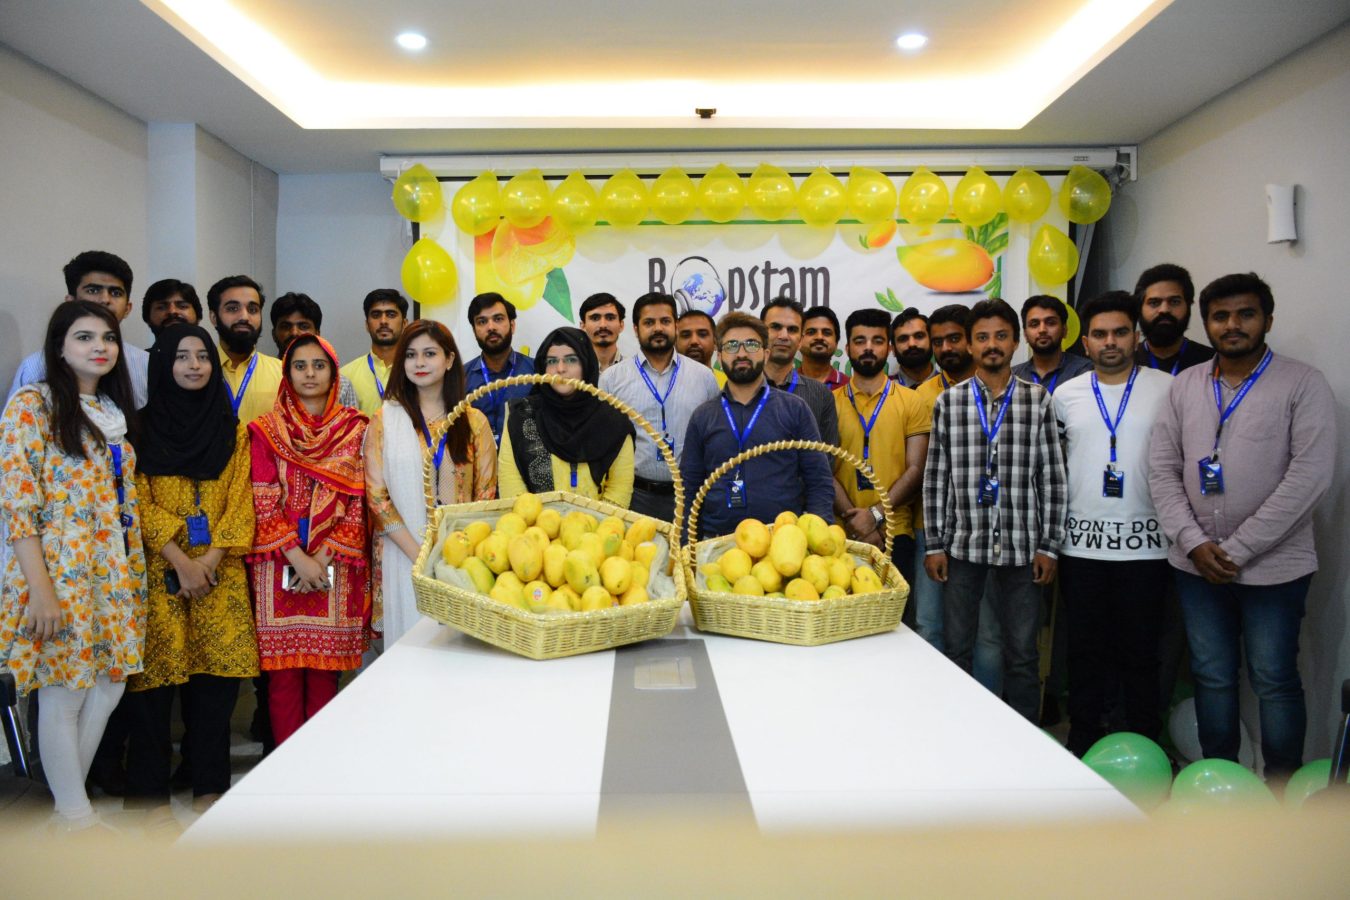 mango day at Ropstam Solutions